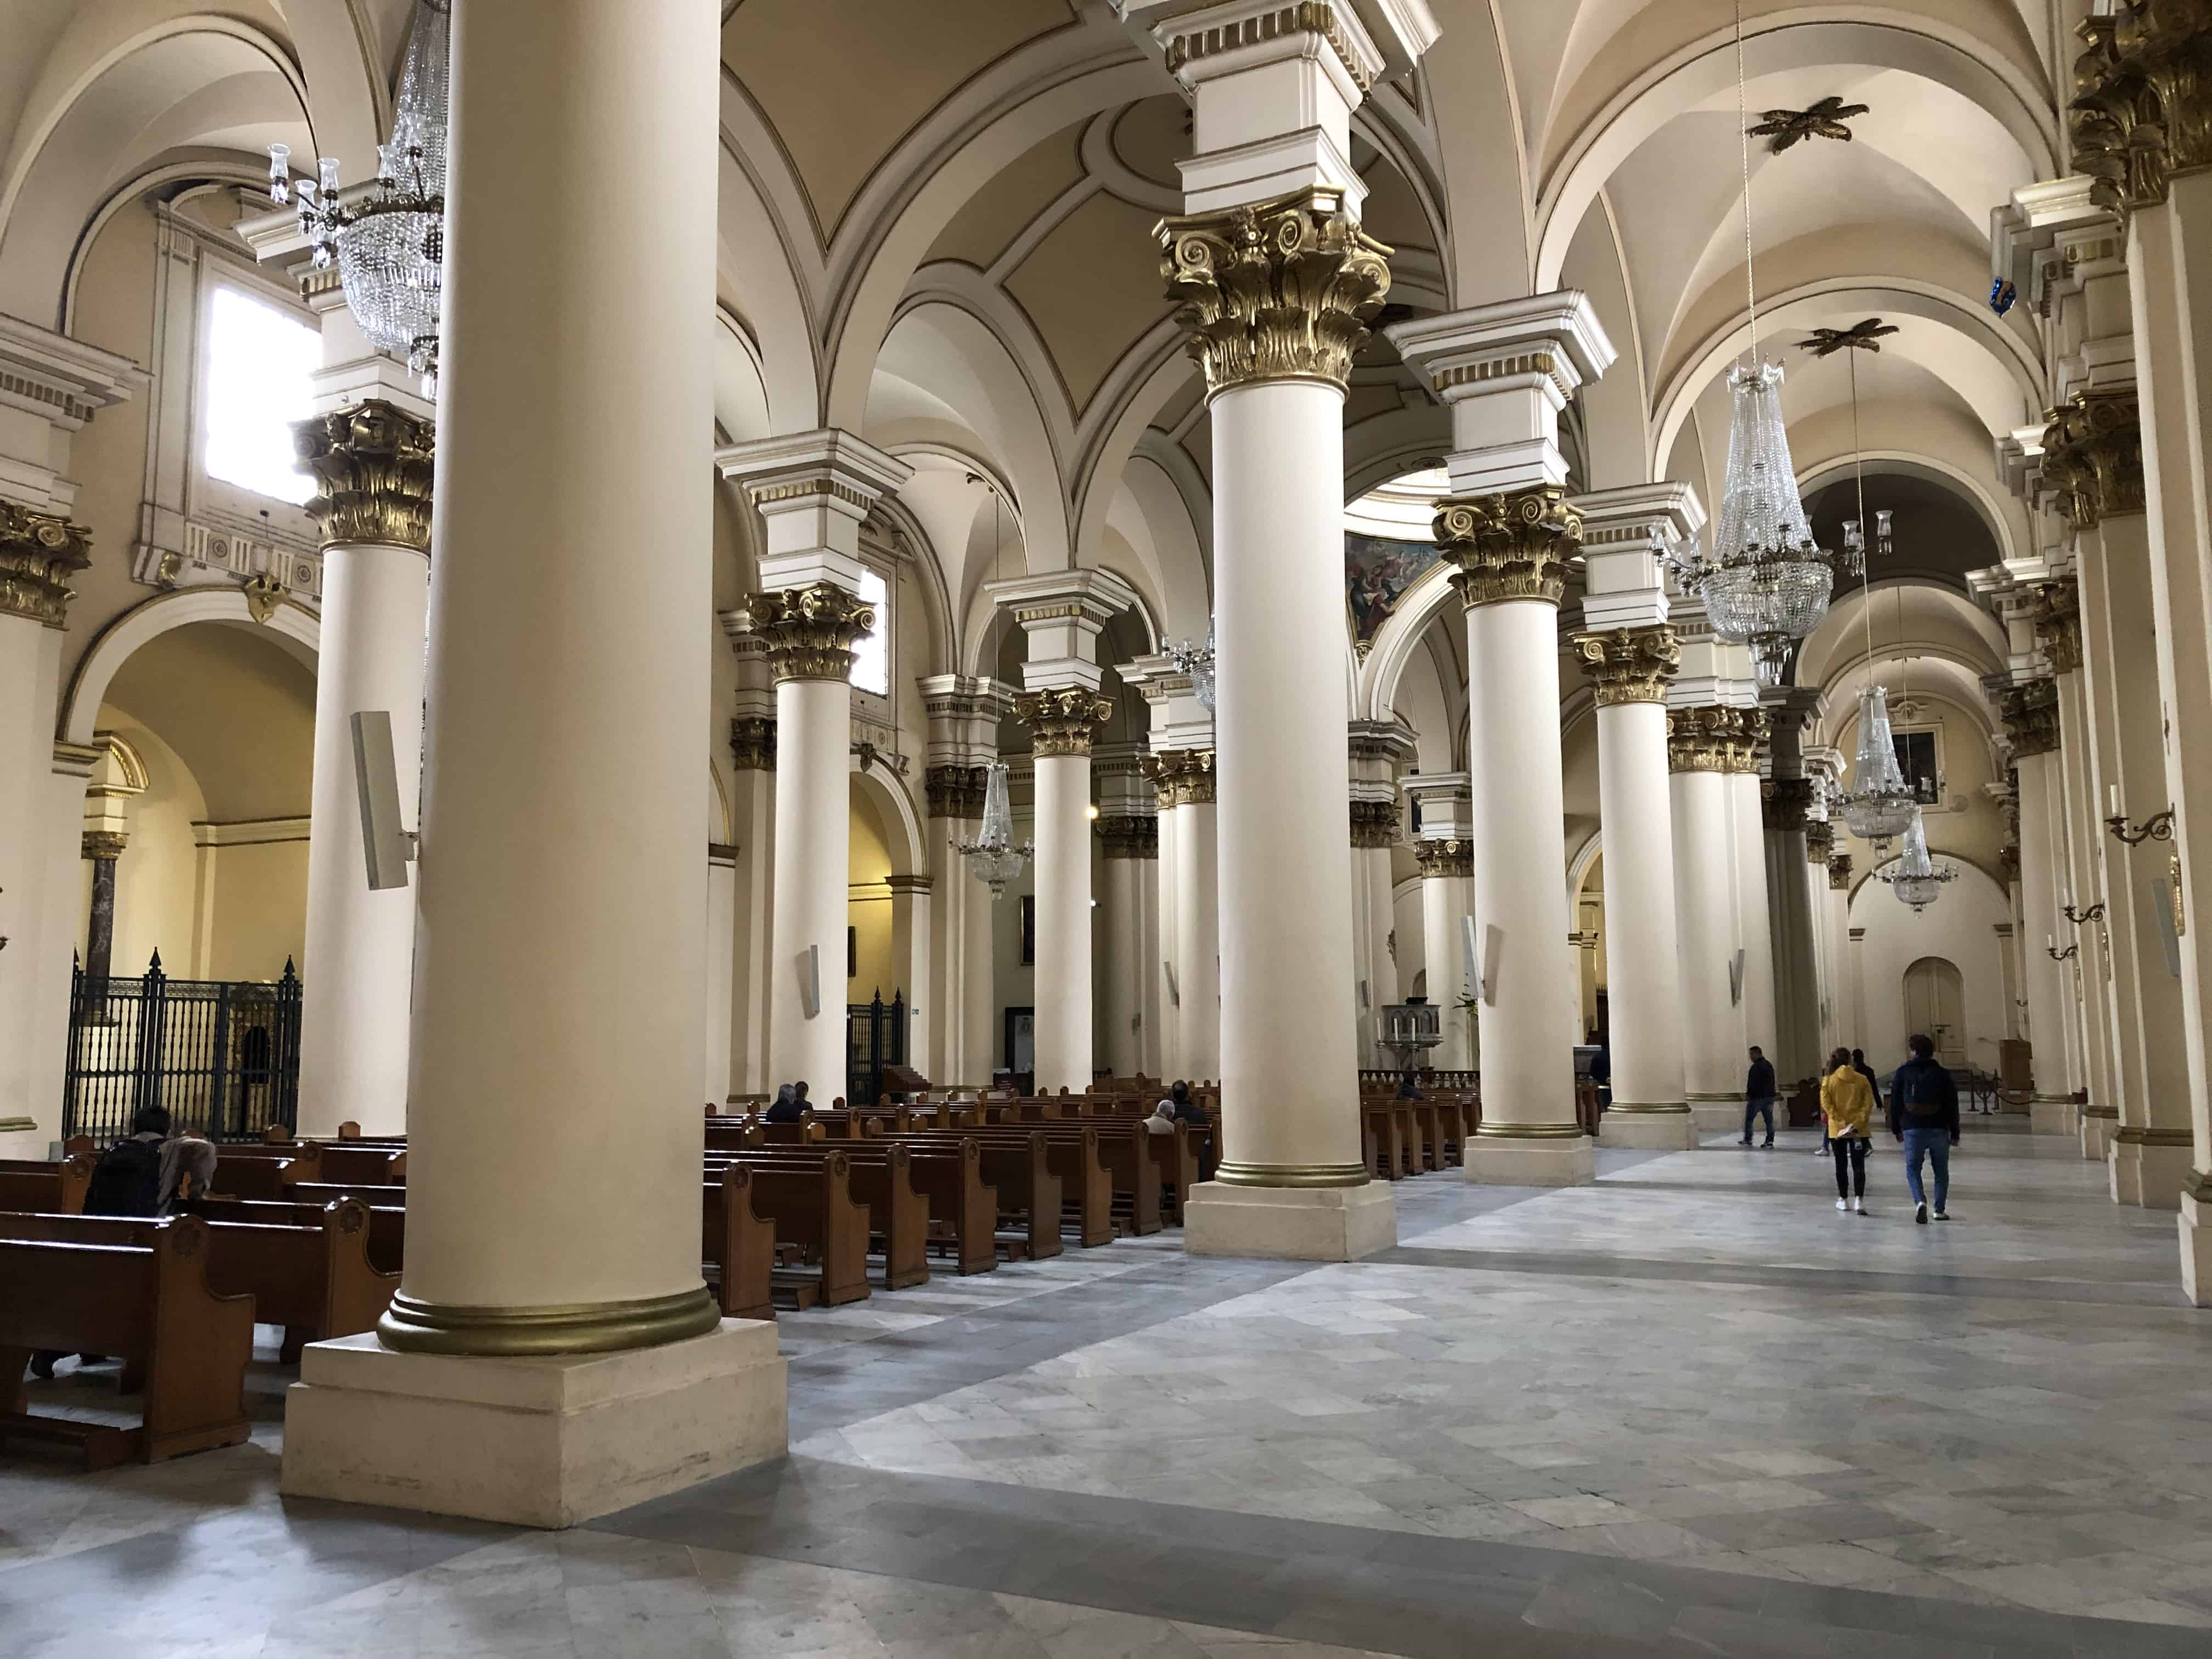 Aisle in the Cathedral of Bogotá